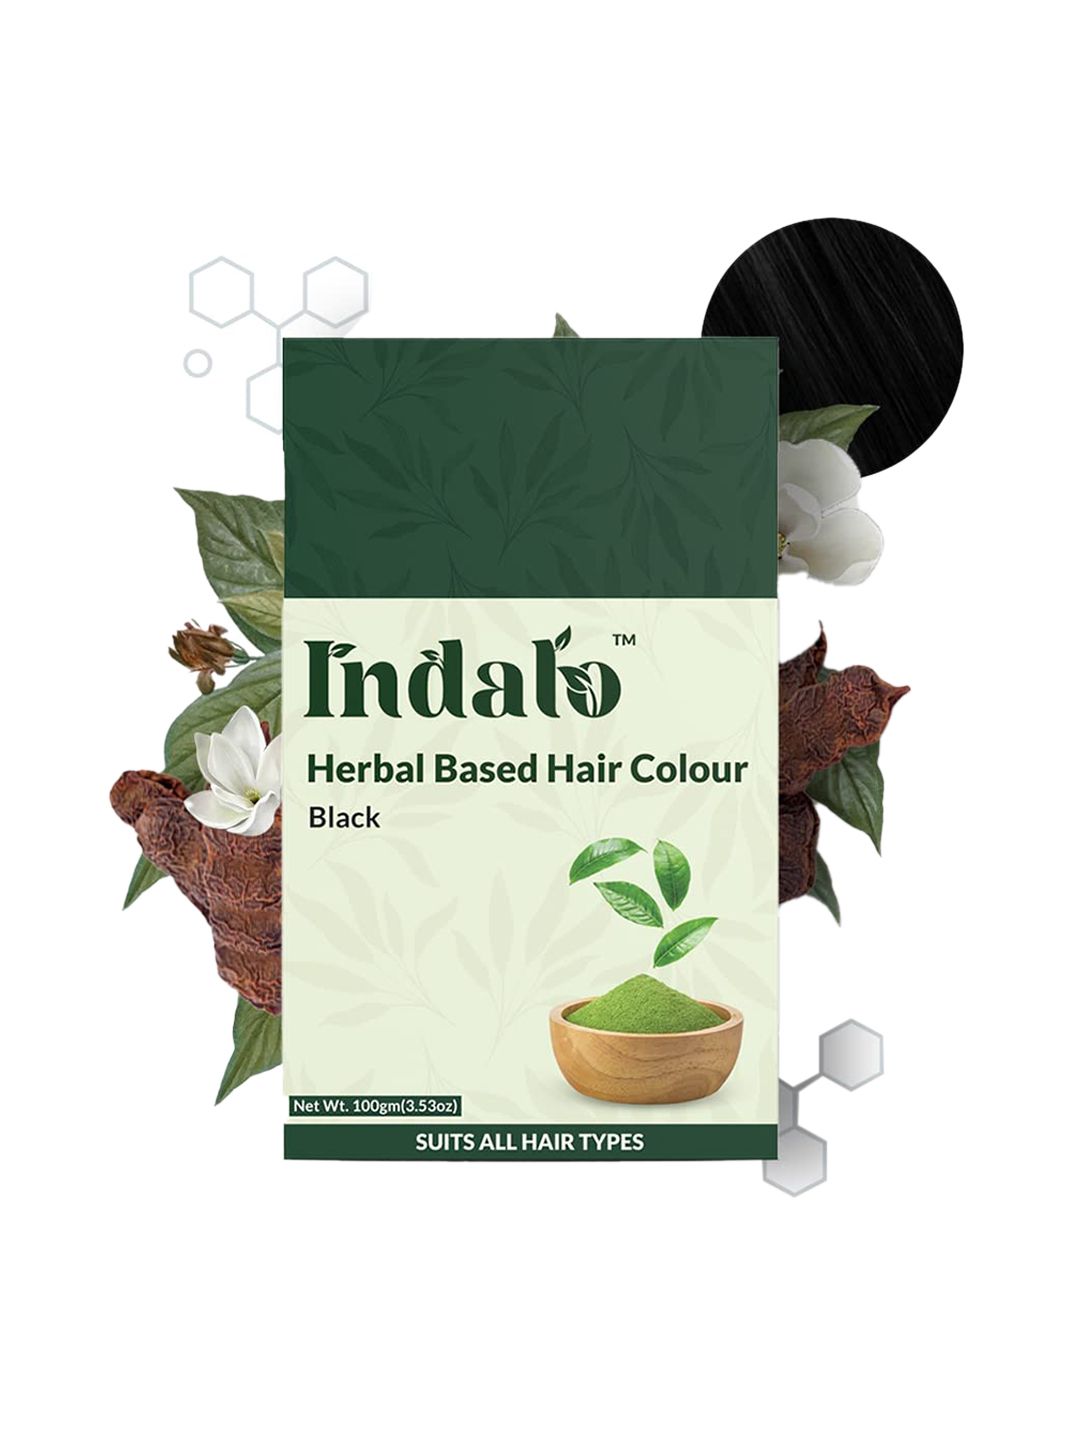 INDALO Long Lasting No Ammonia Herbal Based Hair Colour with Amla and Brahmi 100g - Black Price in India